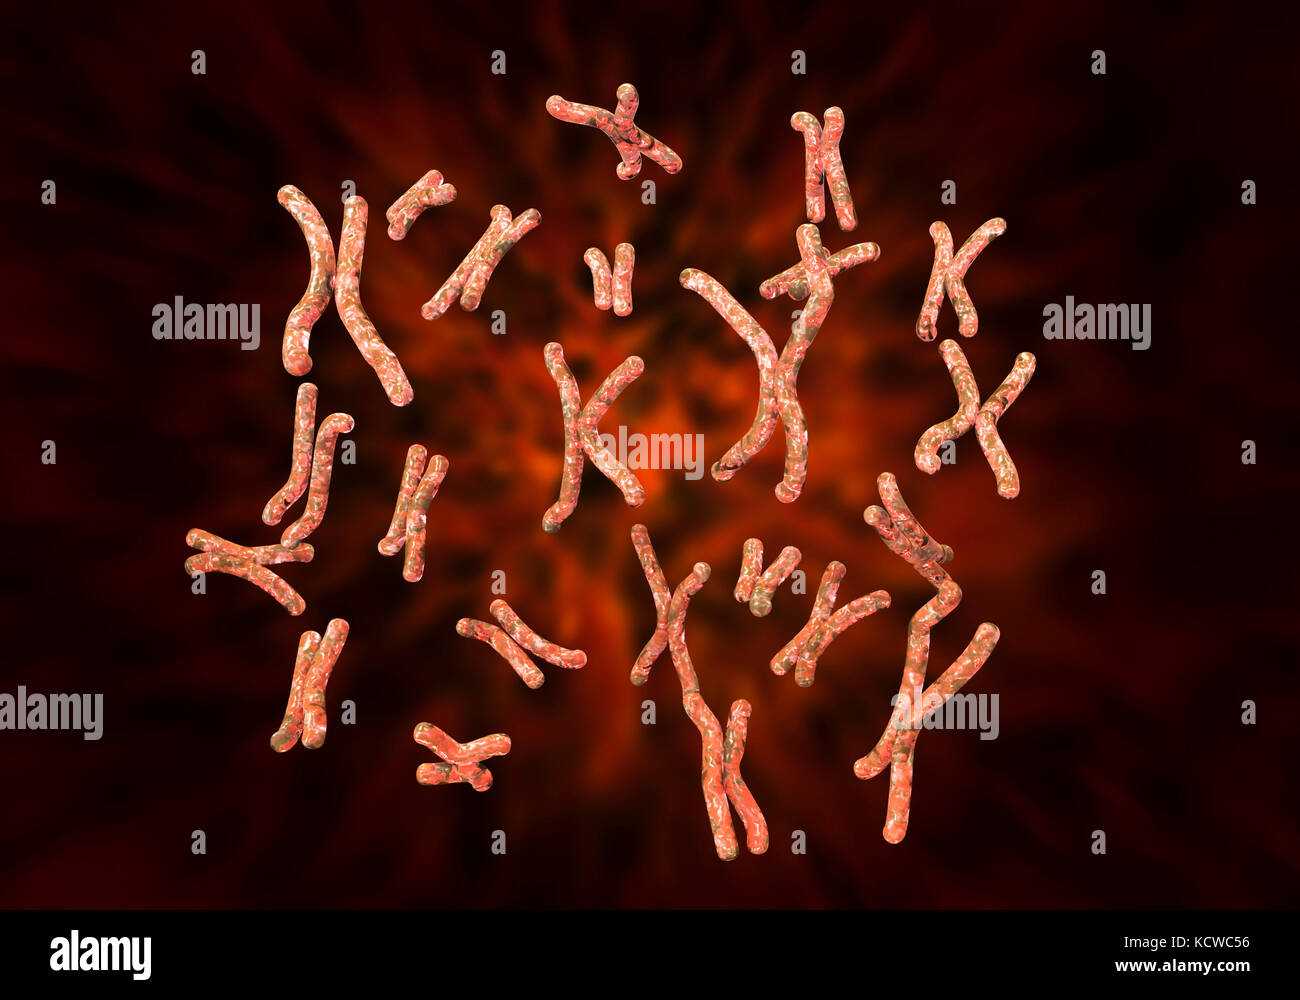 Set of human chromosomes, computer illustration. Chromosomes are a packaged form of the genetic material DNA (deoxyribonucleic acid). The DNA condenses into chromosomes during cell replication for ease of division and transport into the new cell. A complete set of chromosomes is known as a karyotype. In humans, there are 46 chromosomes, consisting of 23 chromosome pairs. Stock Photo